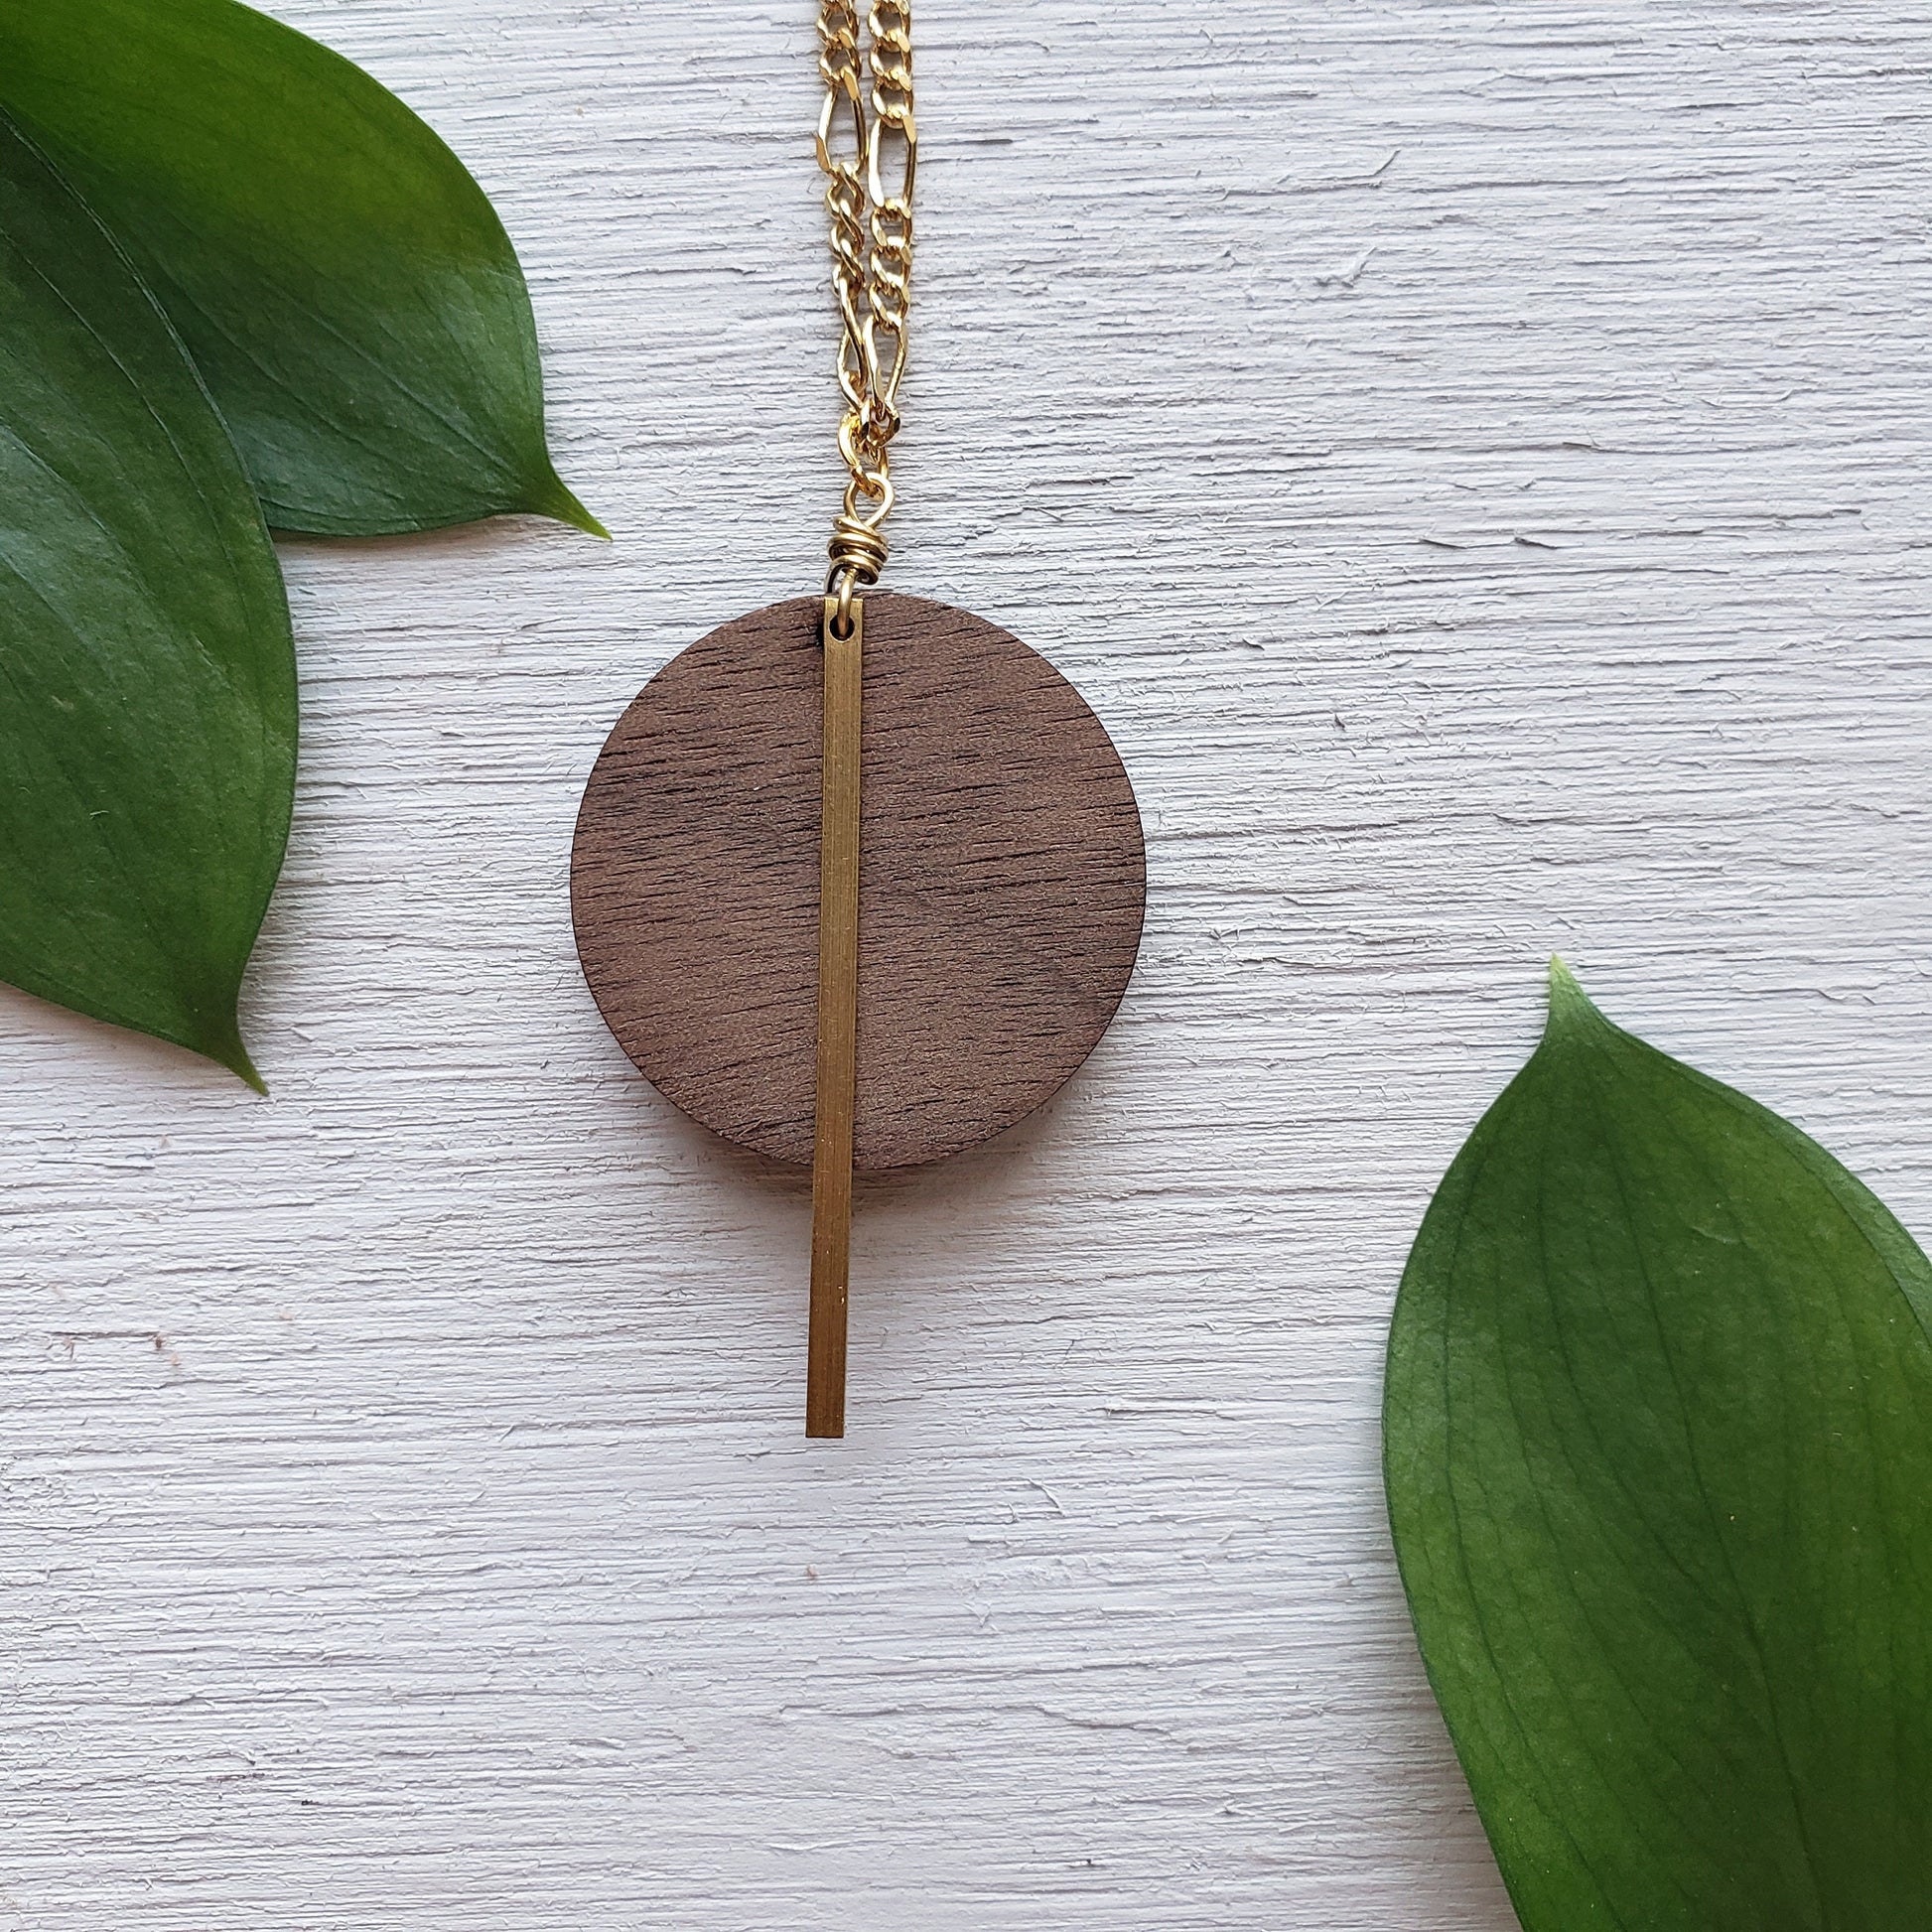 Pendulum - Laser Cut Wood Necklace || Modern Geometric Jewelry || 5th Anniversary Gift for Her